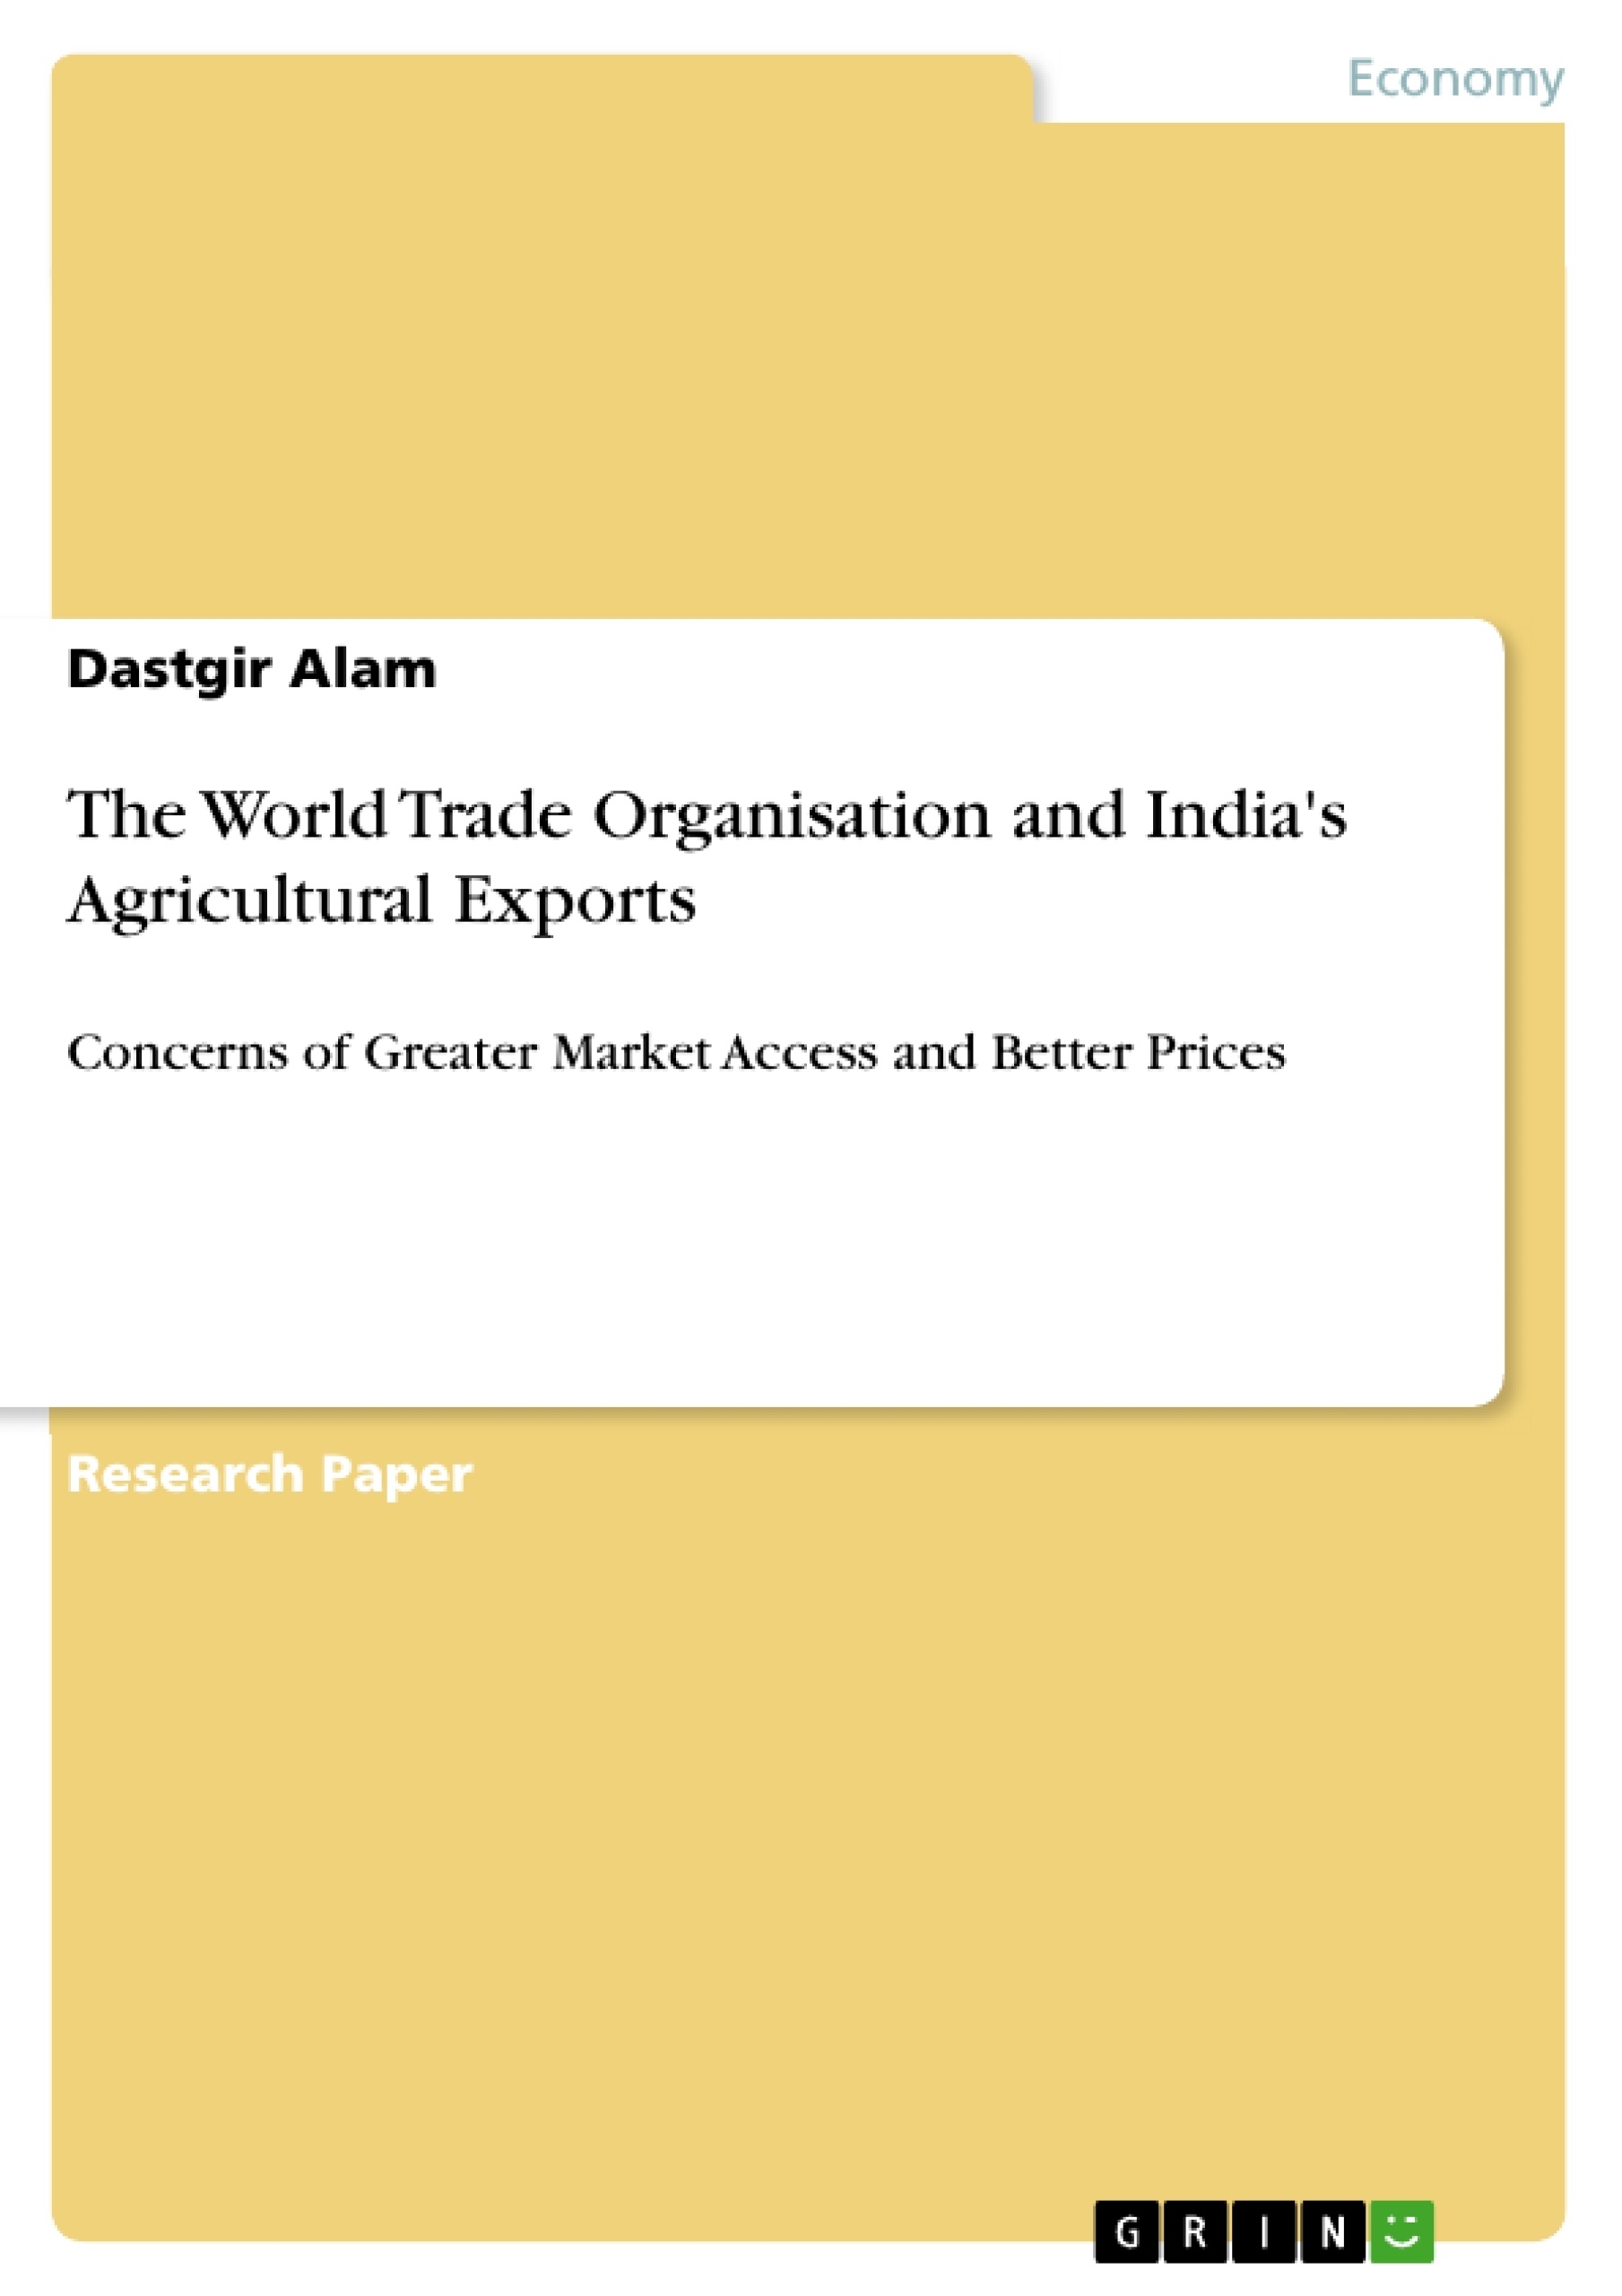 Title: The World Trade Organisation and India's Agricultural Exports